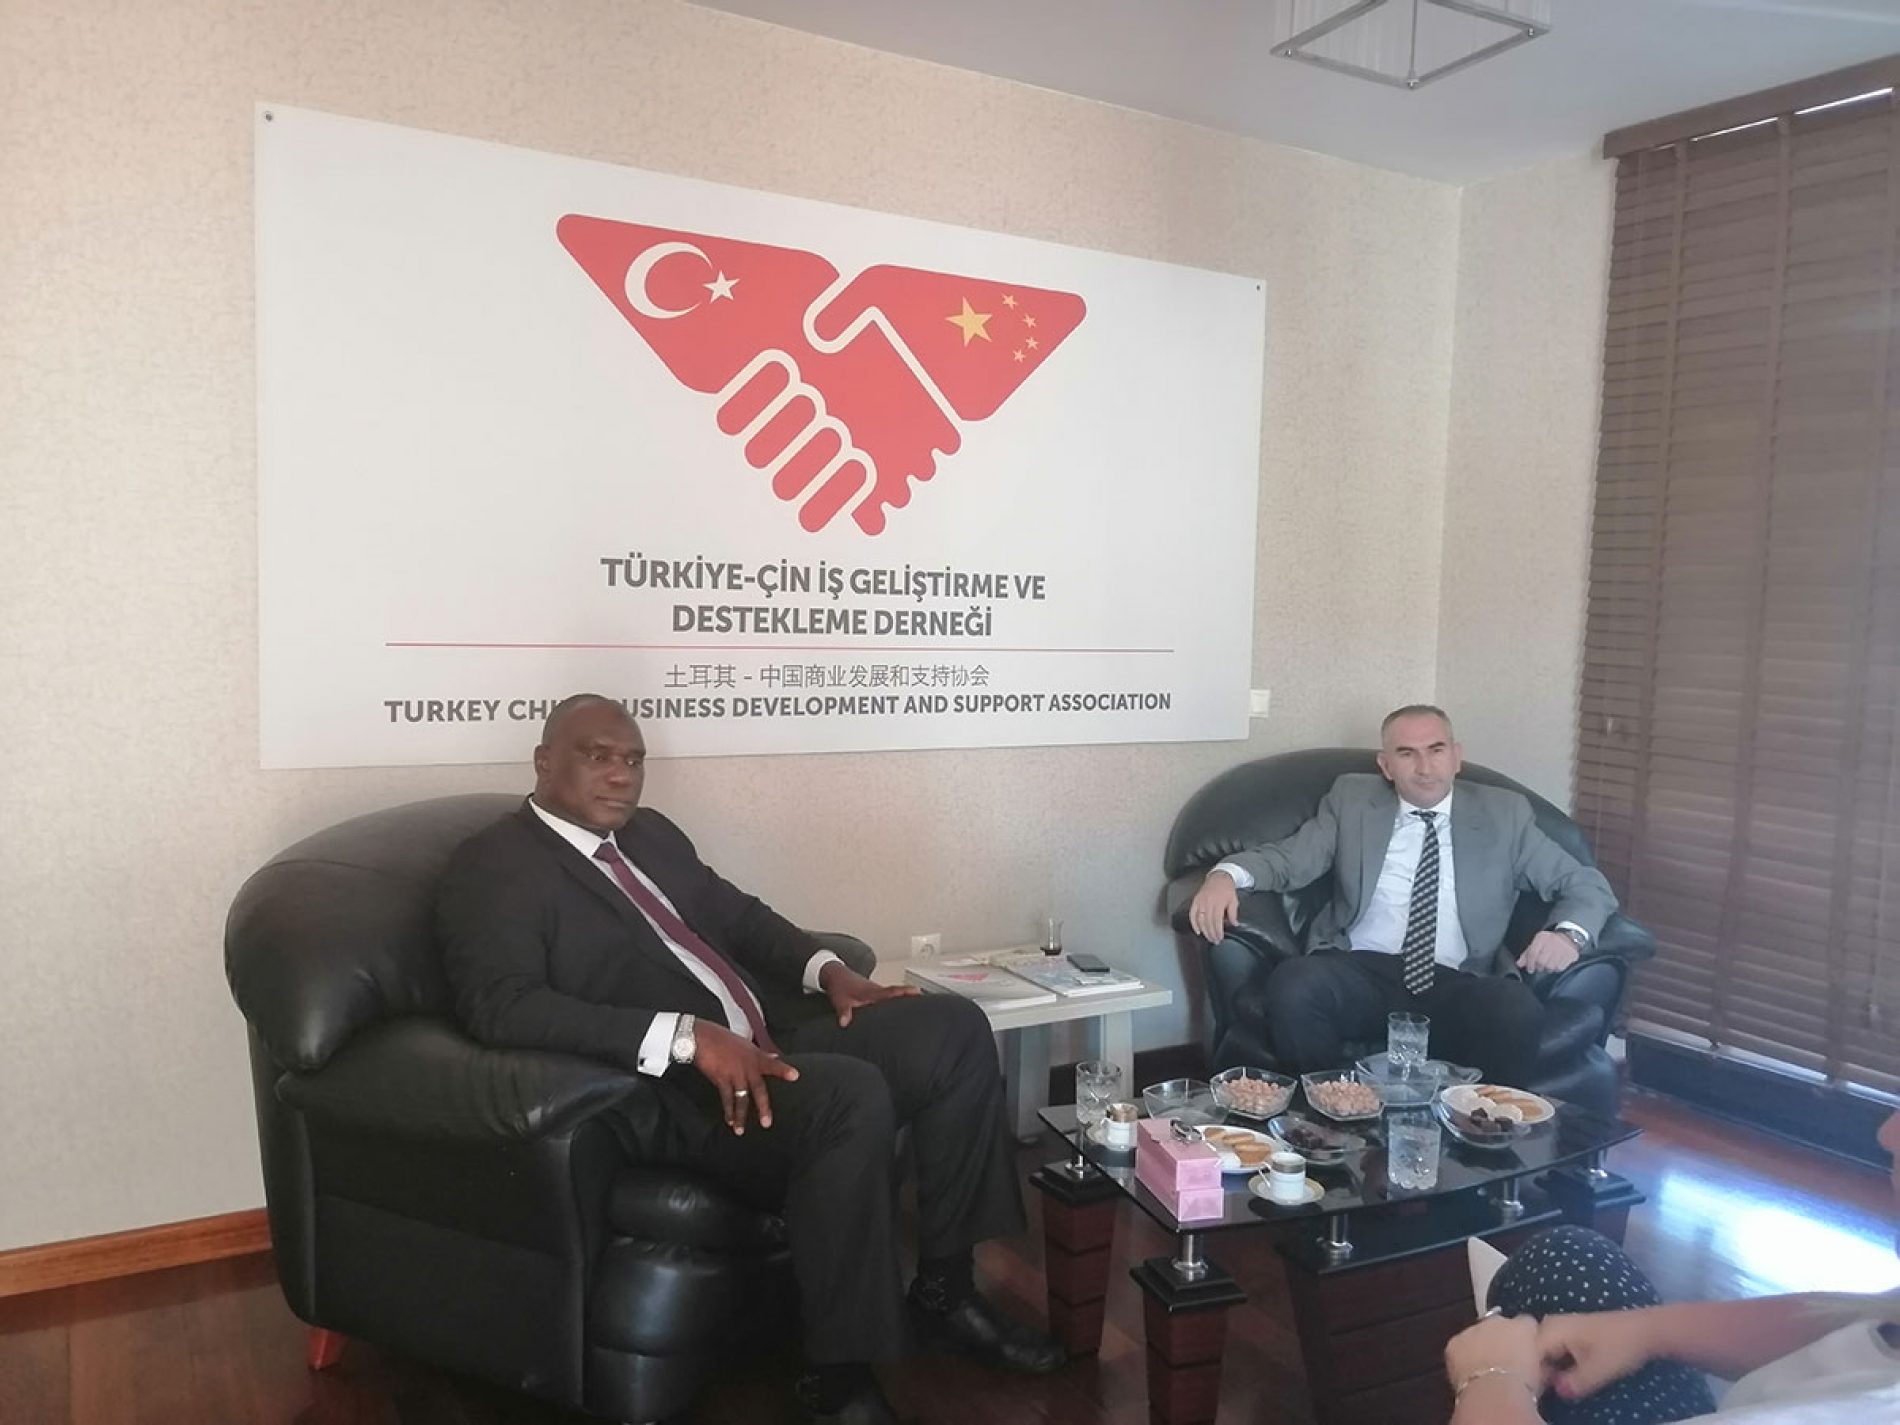 THE AMBASSADOR OF THE GAMBIA, MR.SERING MODOU NJIE VISITED OUR BOARD CHAIRMAN, İHSAN BEŞER AT OUR ASSOCIATION HEADQUARTERS